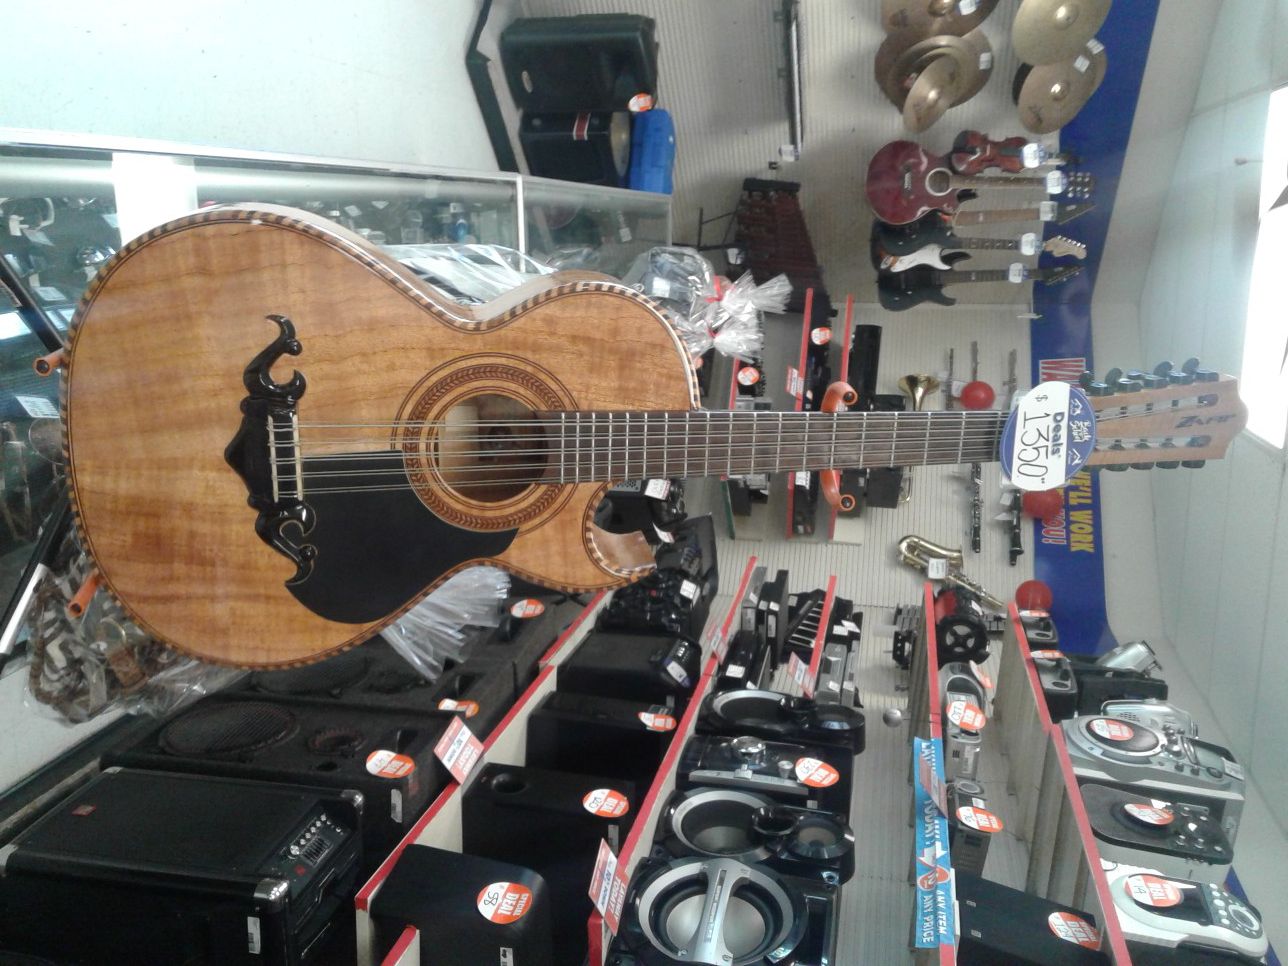 Acoustic 12 String